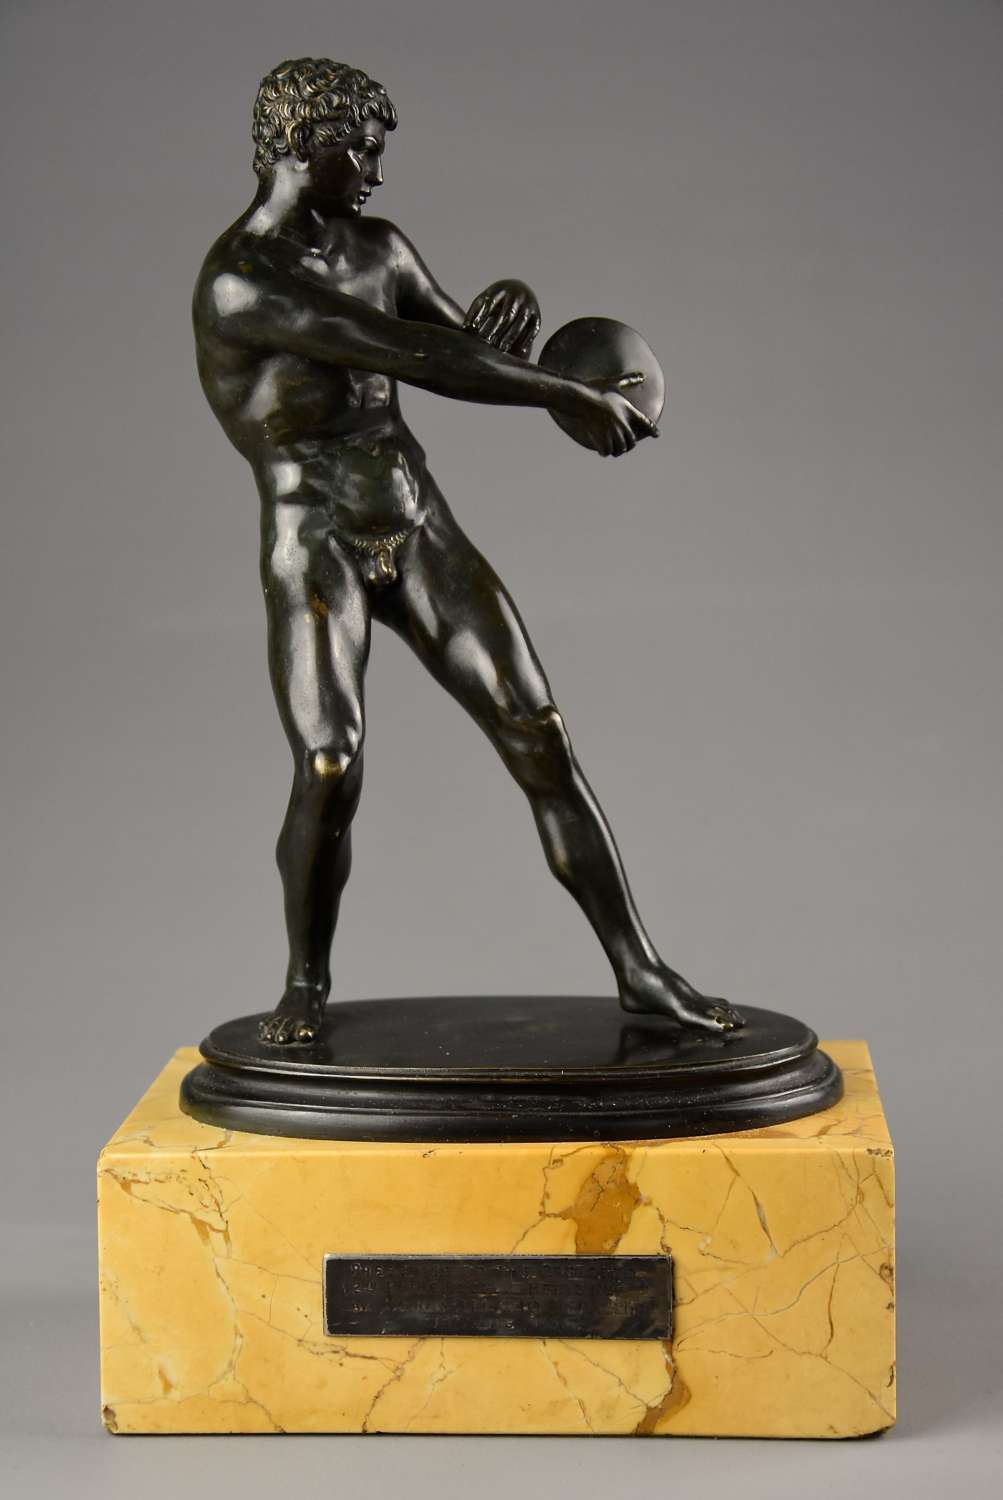 Late 19th century Italian Grand Tour bronze figure of a discus thrower